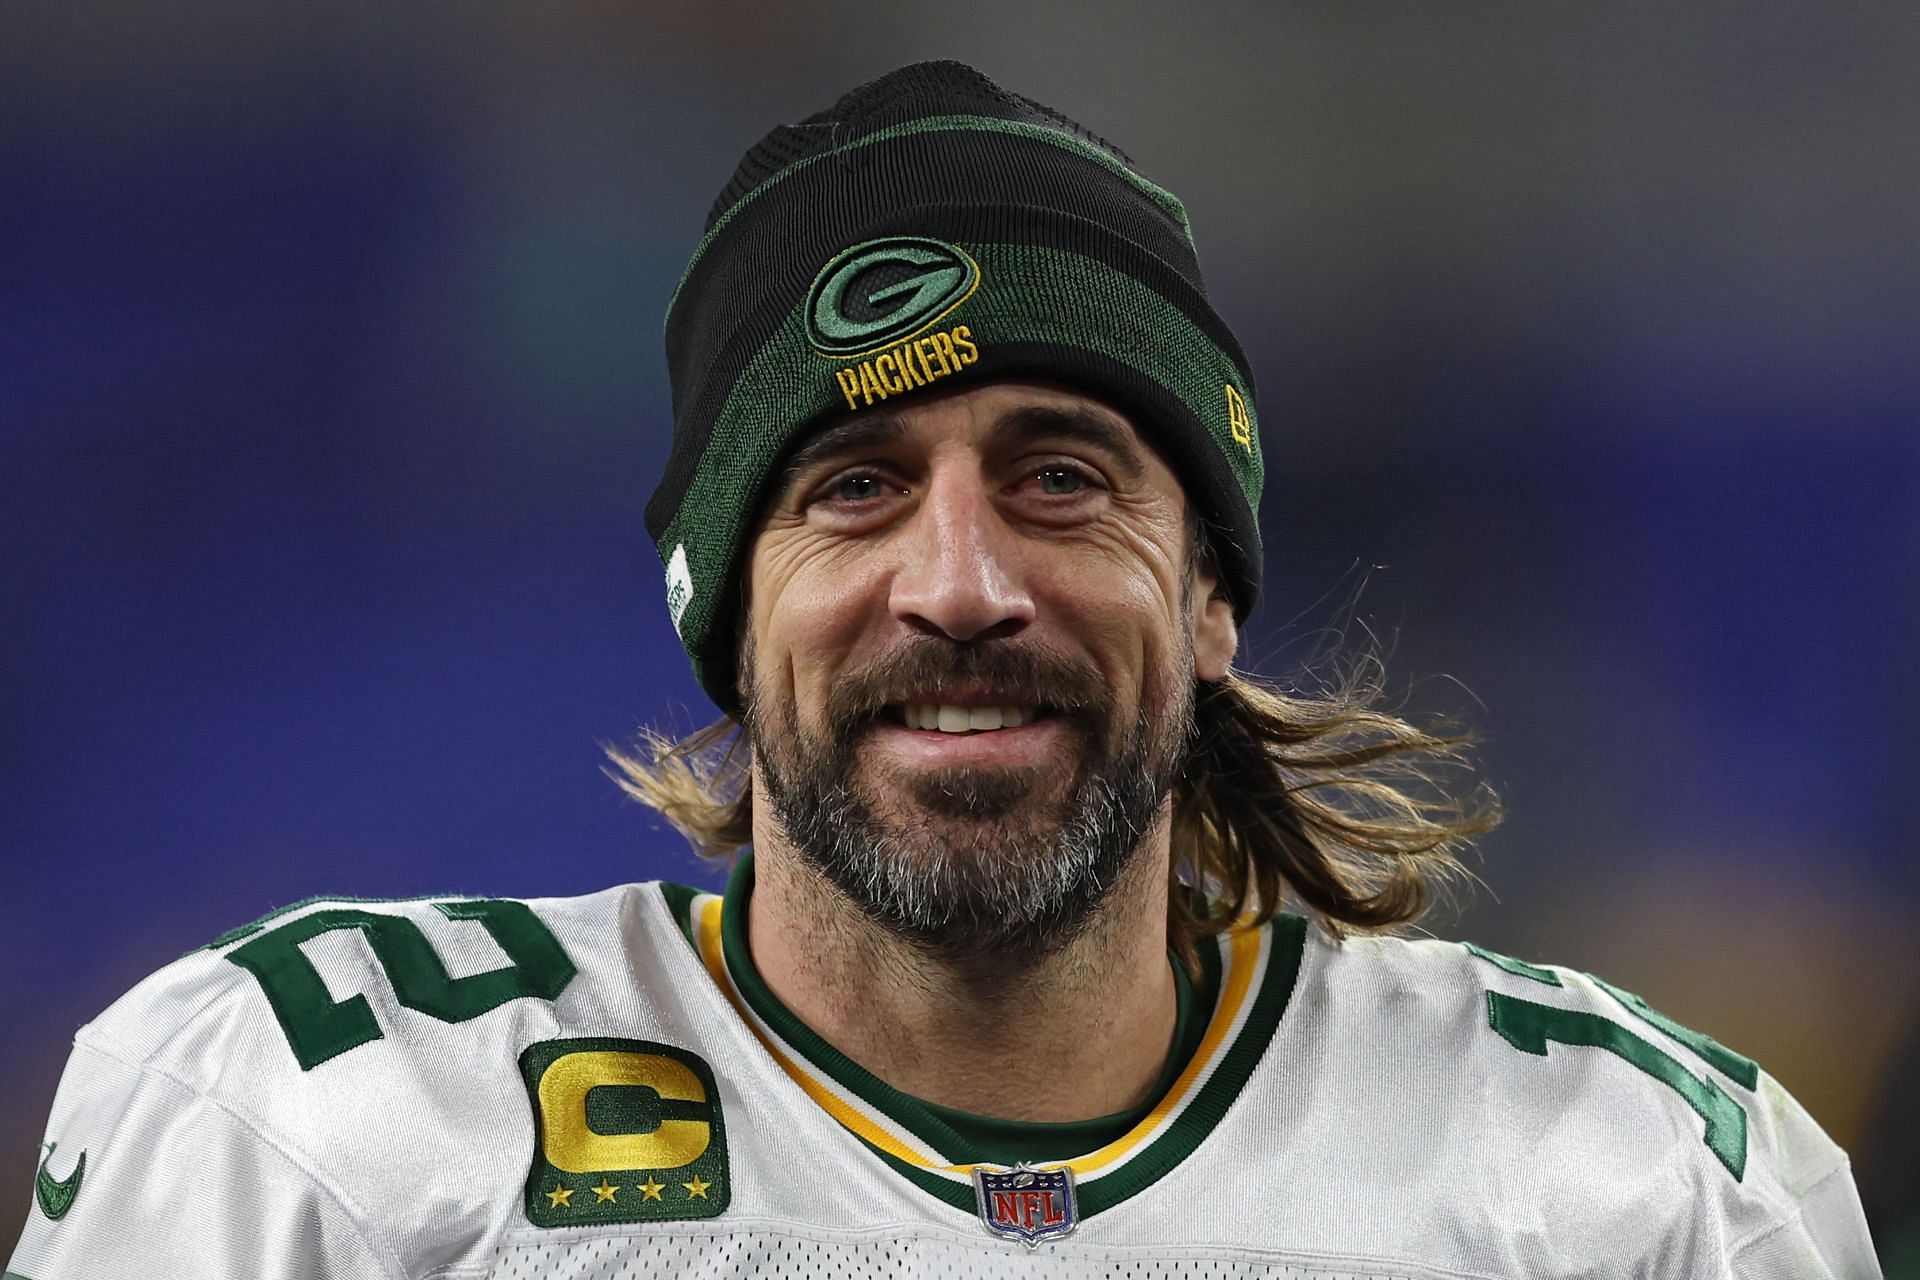 Green Bay Packers quarterback Aaron Rodgers is looking forward to playing on Christmas Day